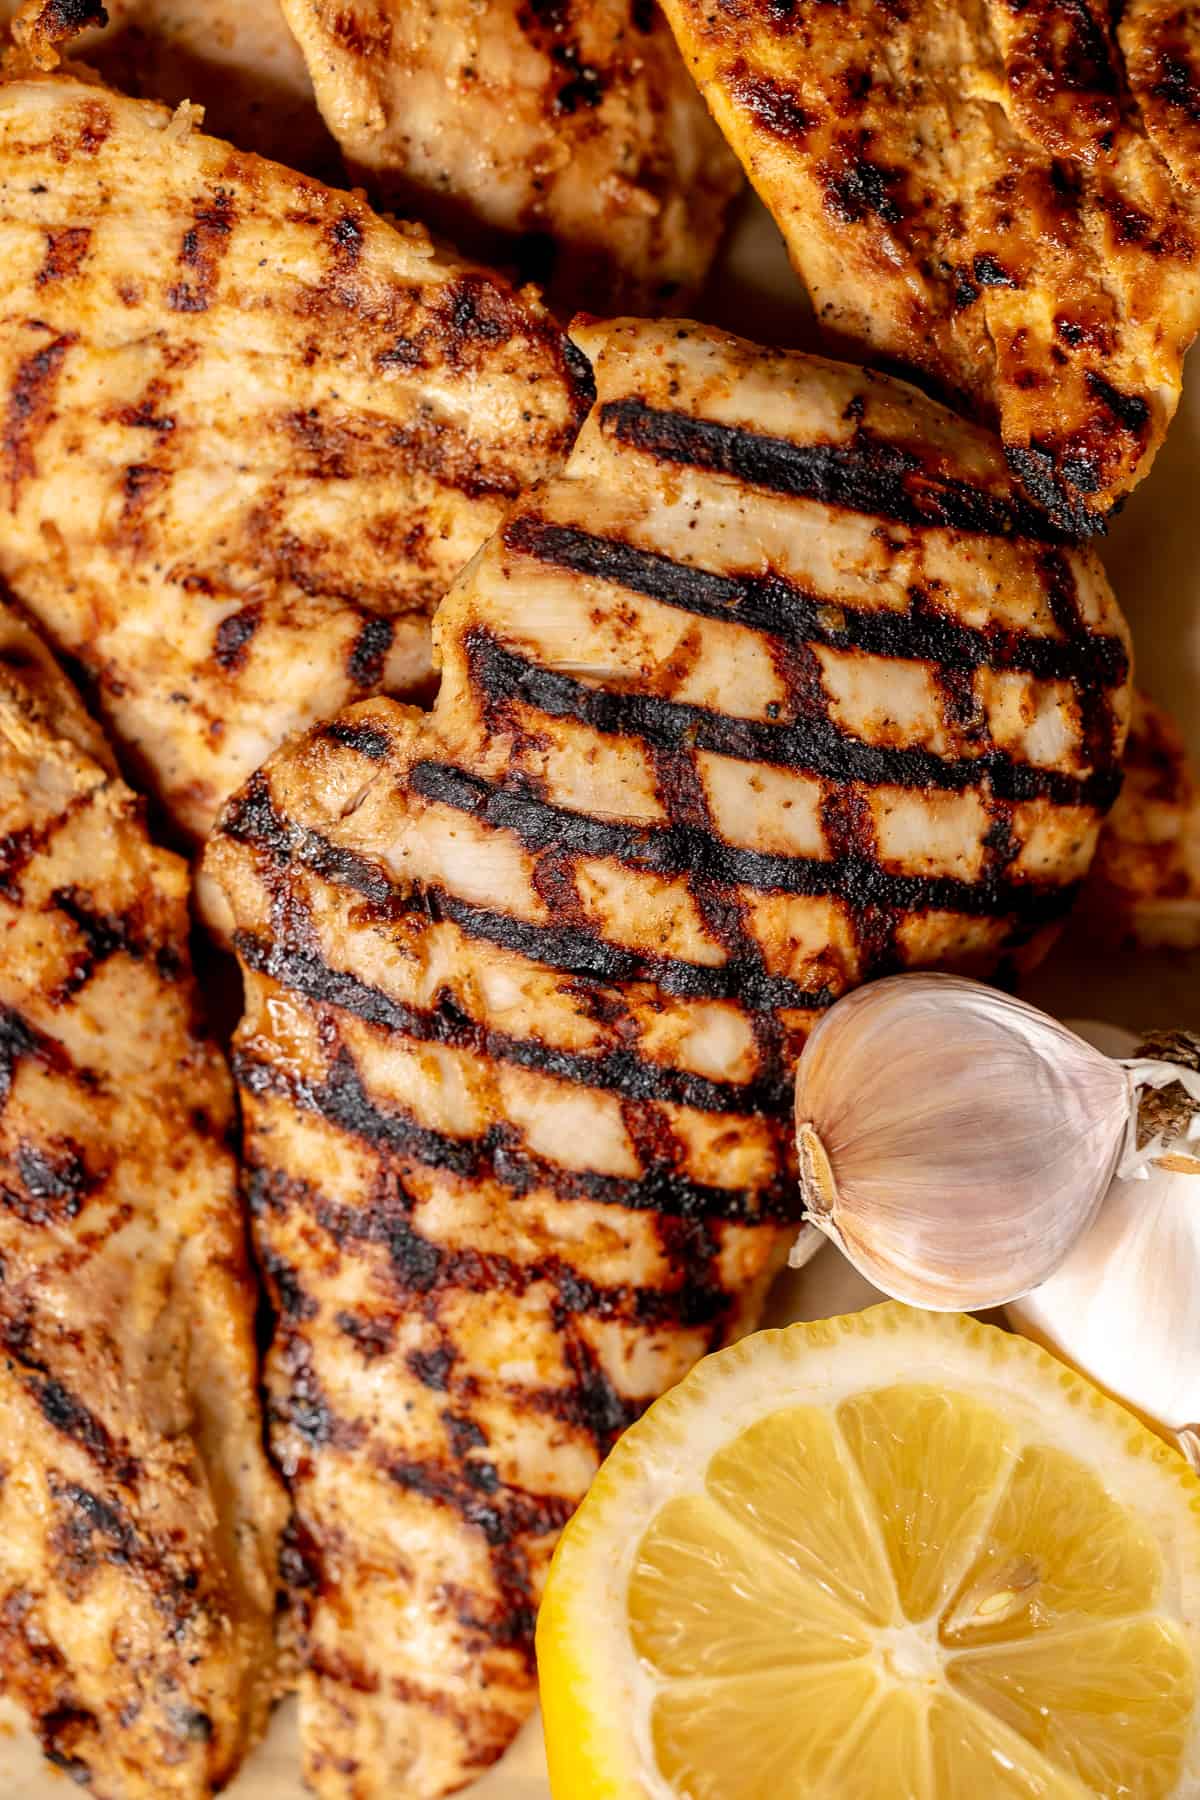 Grilled chicken breasts arranged on a sheet of parchment paper, showing cross-hatch grill marks.